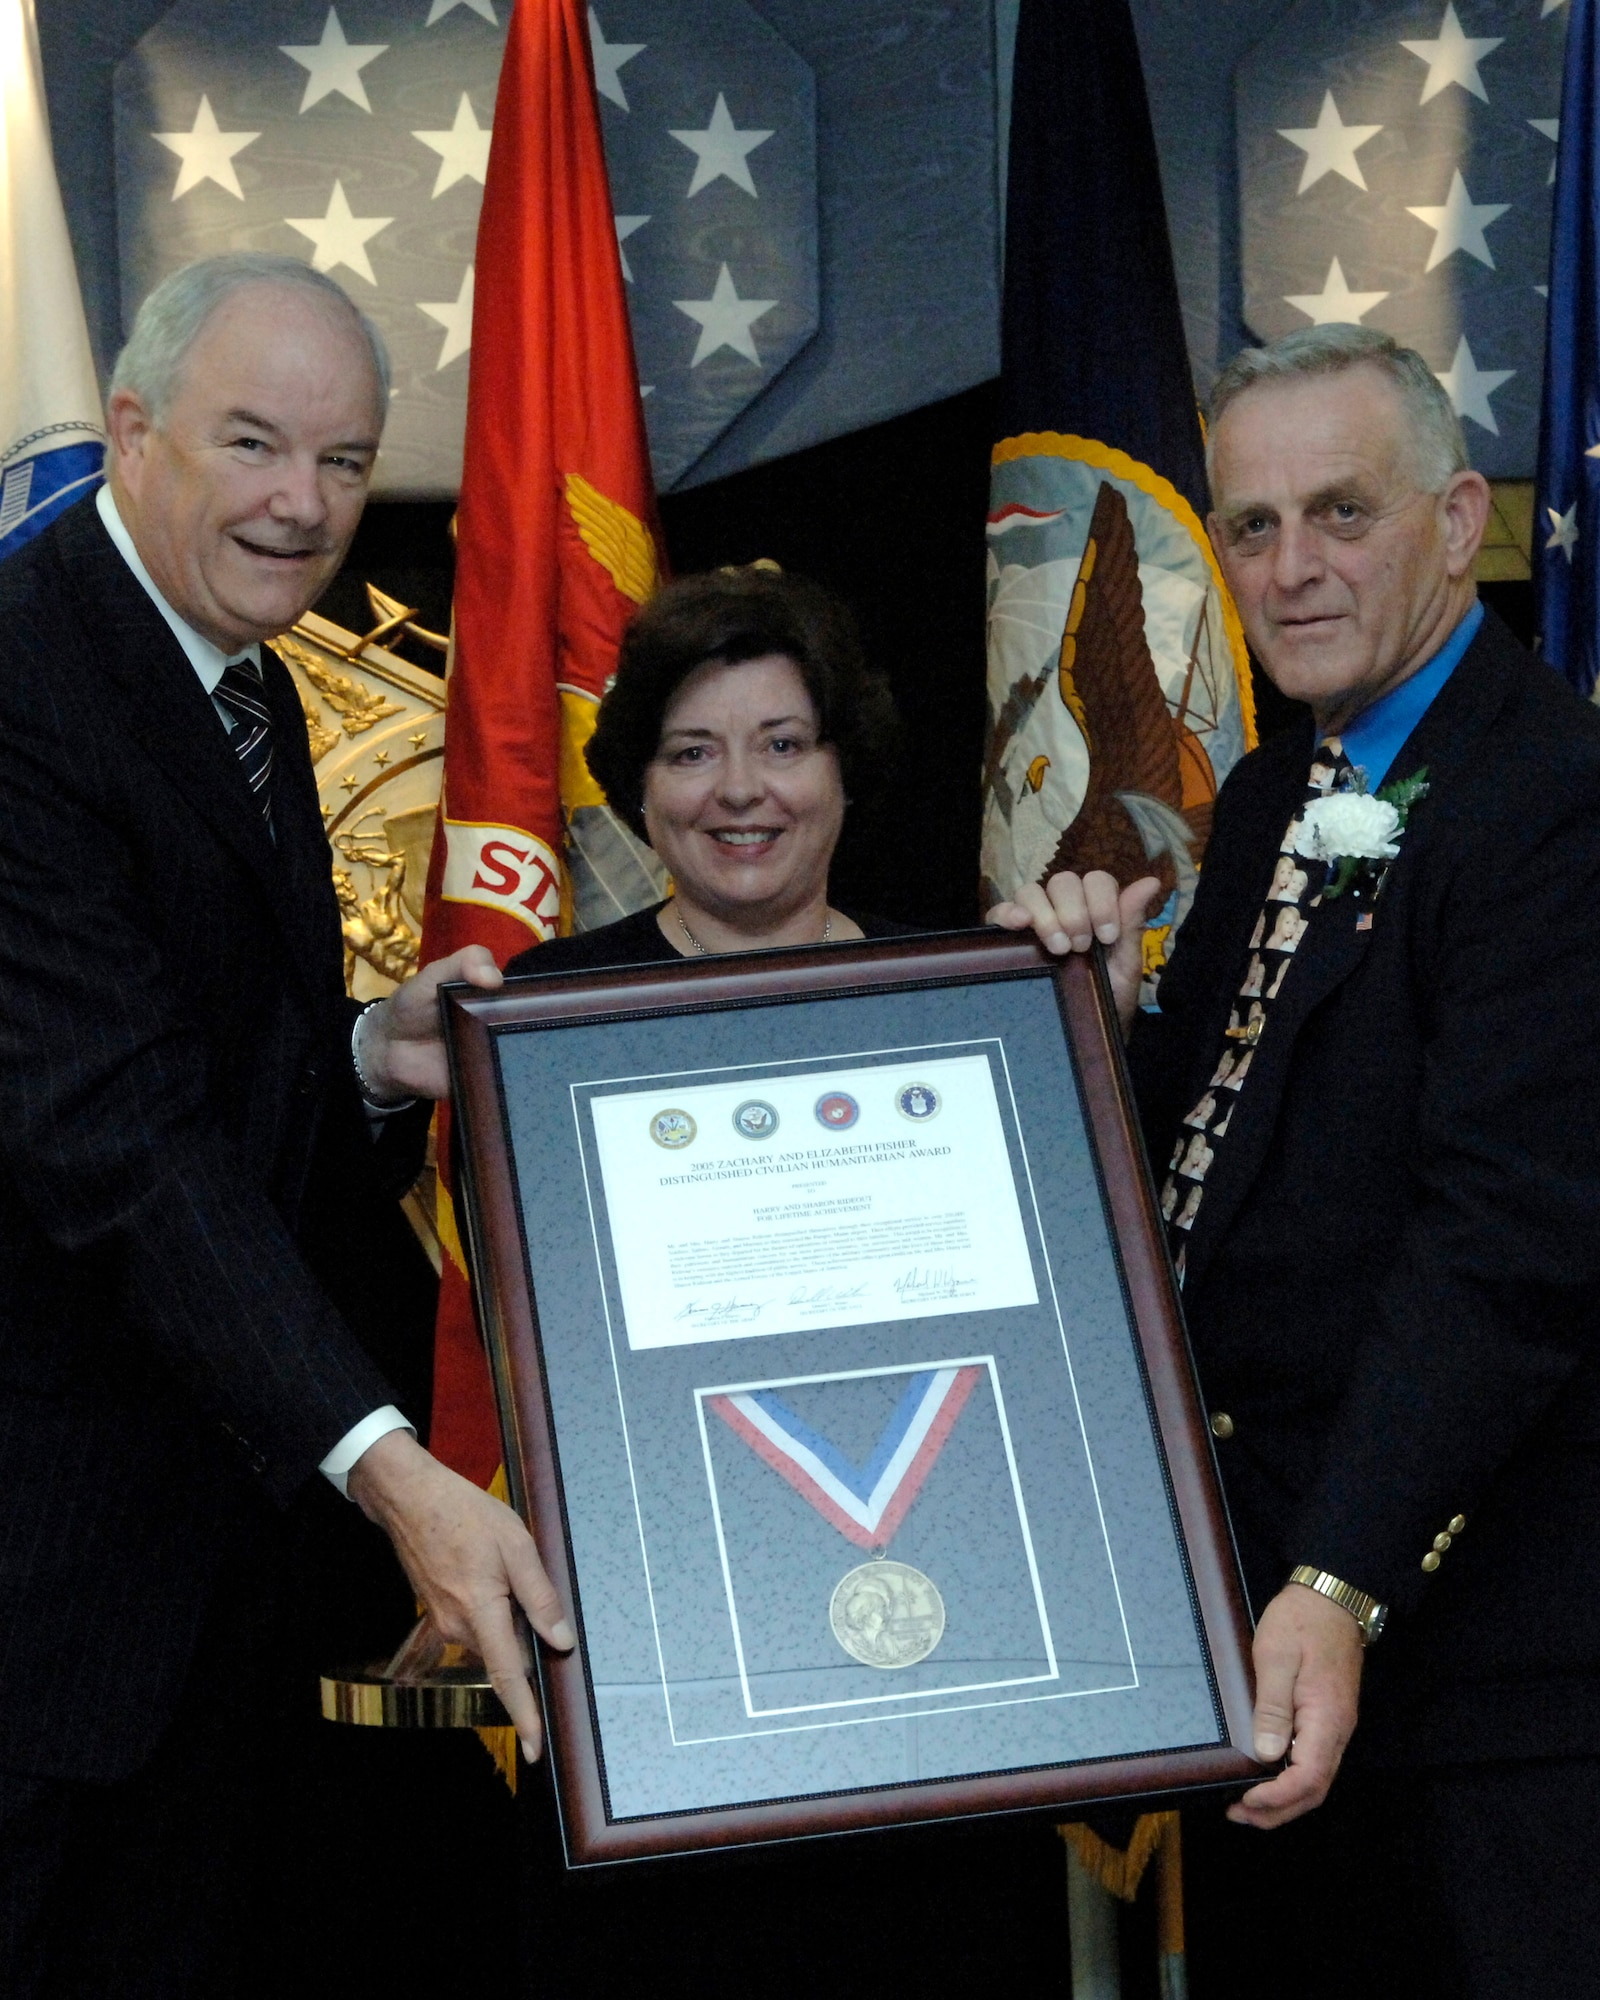 Secretary of the Air Force Michael W. Wynne presents Sharon and Harry Rideout with the 2006 Zachary and Elizabeth Fisher Distinguished Civilian Humanitarian Award Oct. 26 at the Pentagon.  Among their many accomplishments to support servicemembers, the Rideouts created the Bangor Greeters Group at Bangor International Airport, Maine.  The all-volunteer group greets Soldiers, Sailors, Airmen and Marines as they pass through the airport, either going to or returning from overseas deployments. (U.S. Air Force photo/Ron C. Hall)